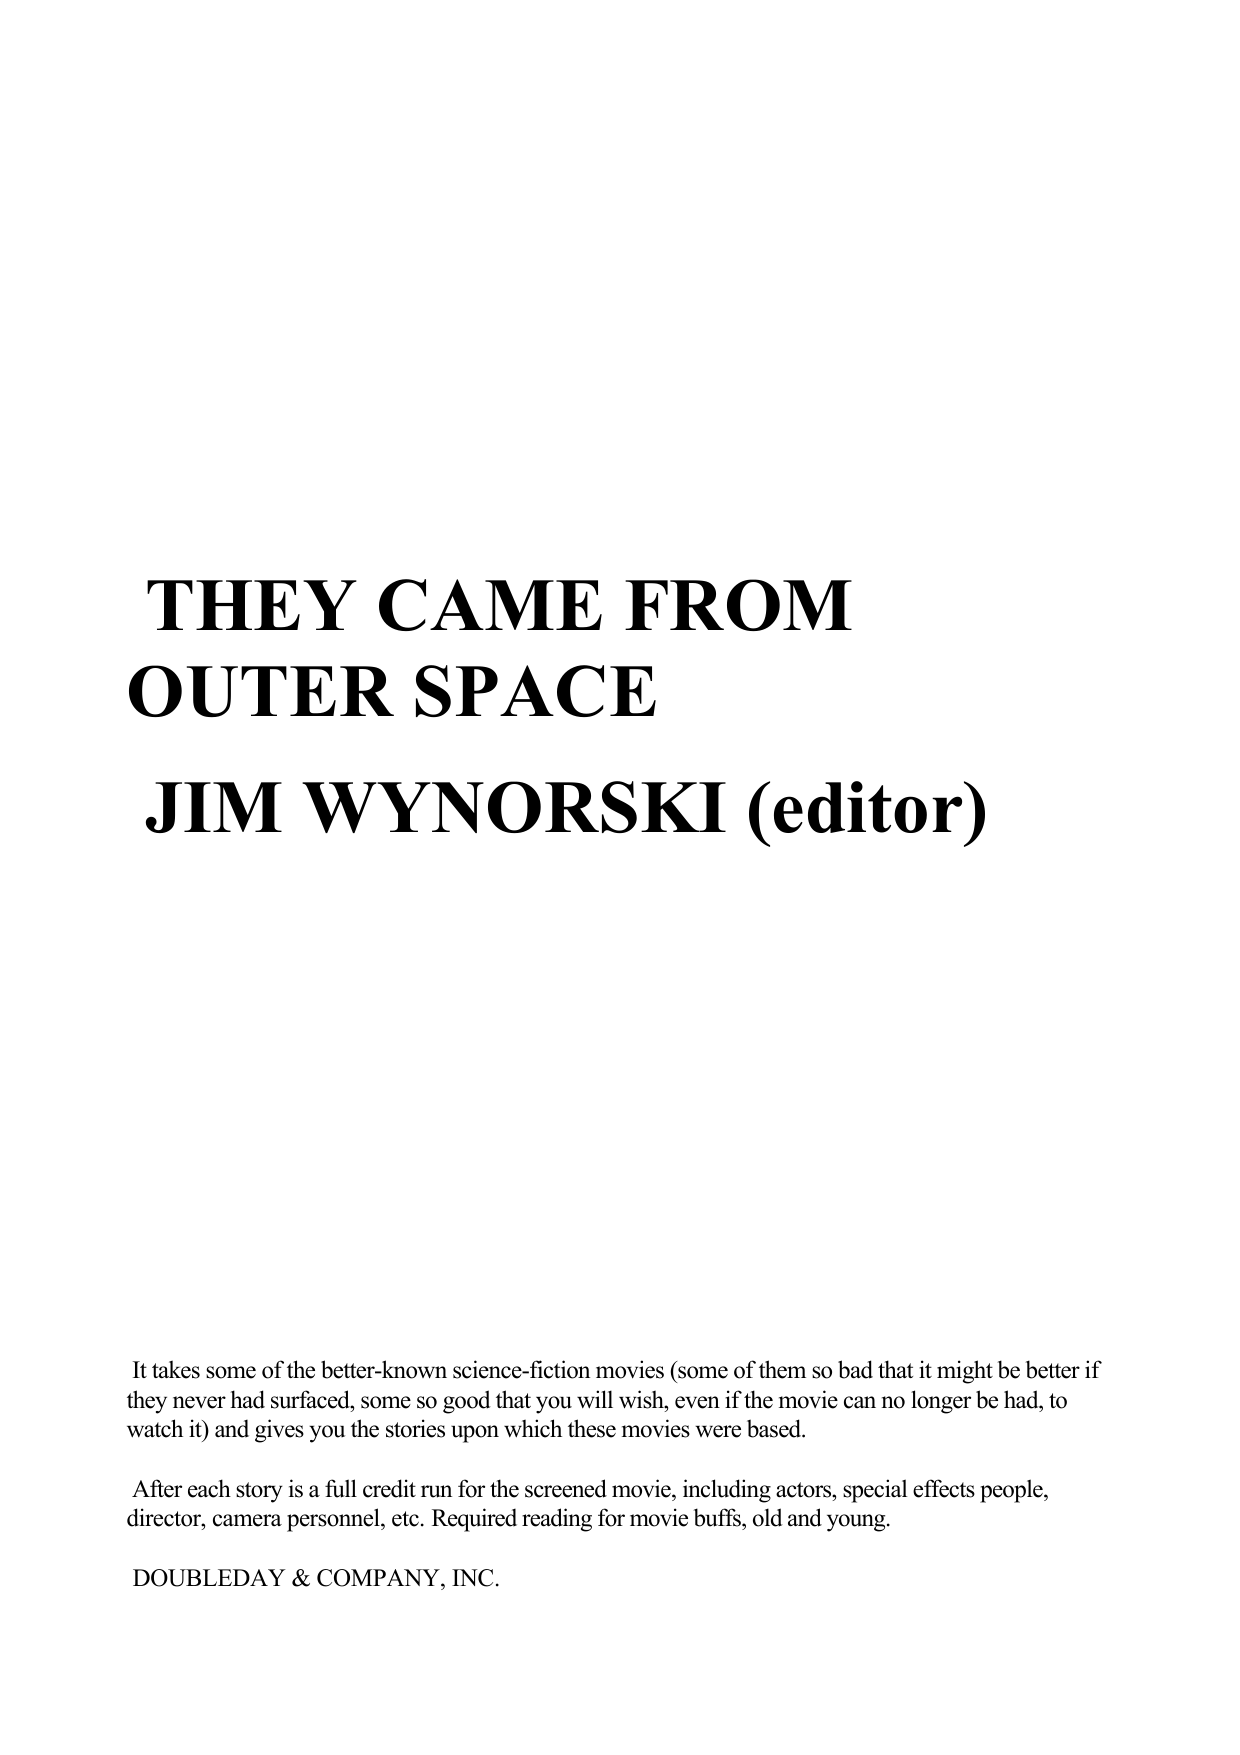 They From Outer Space.pdf